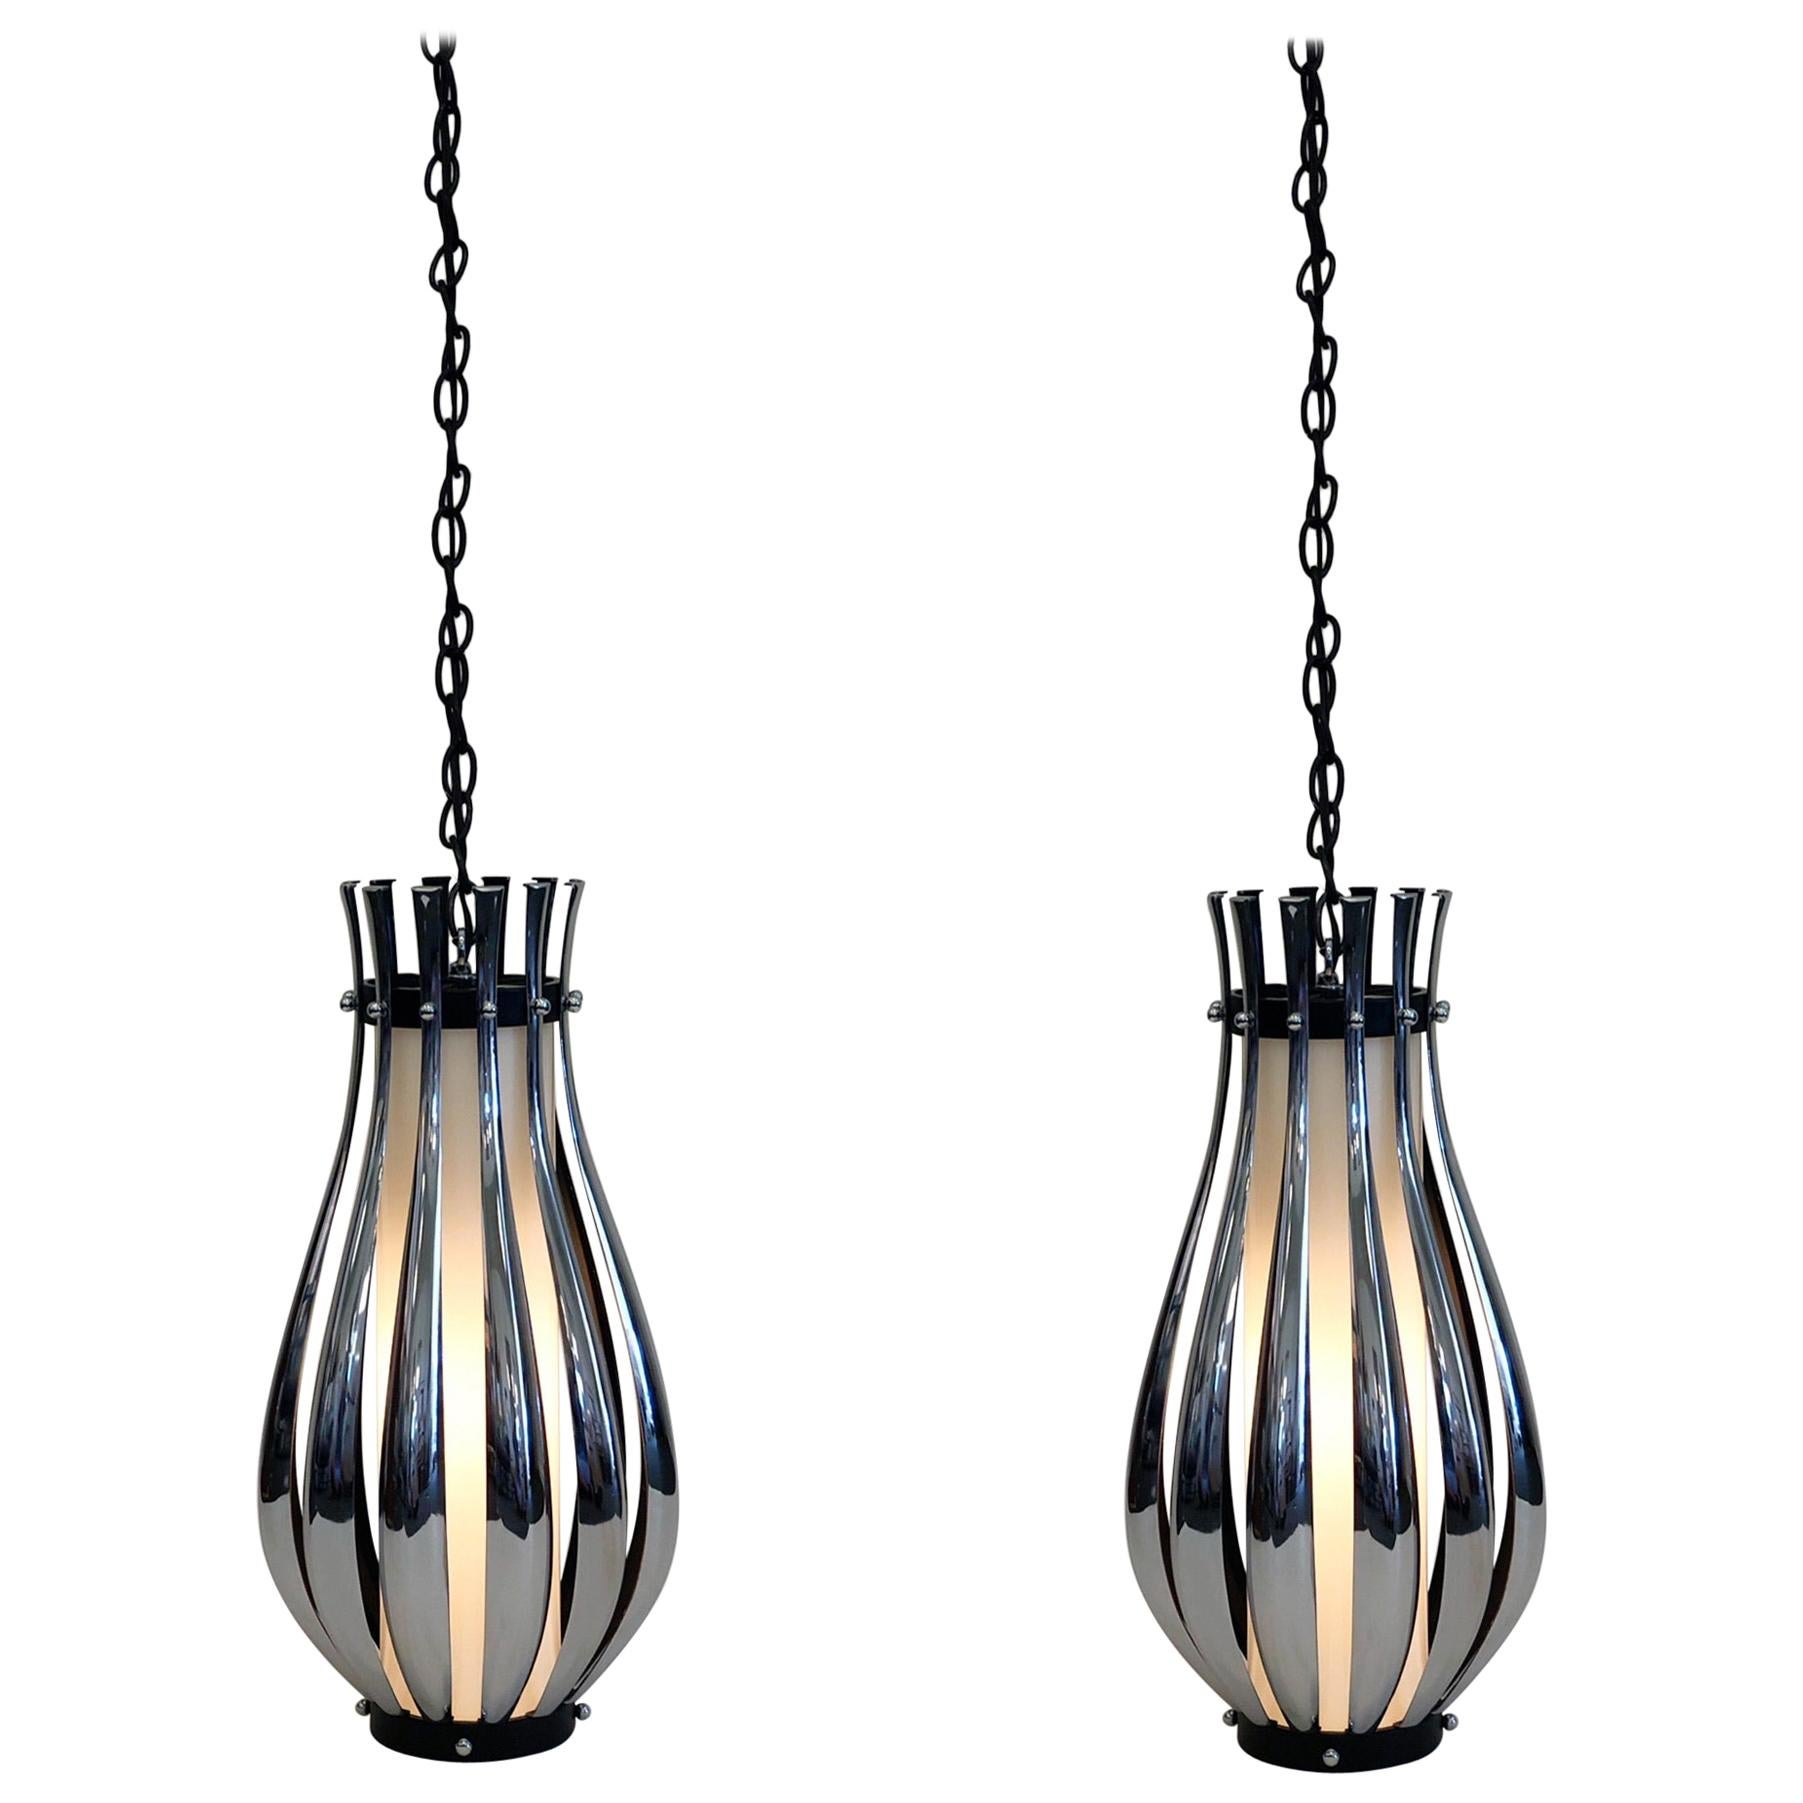 Pair of Chrome and White Glass Pendant Lamps by Sonneman